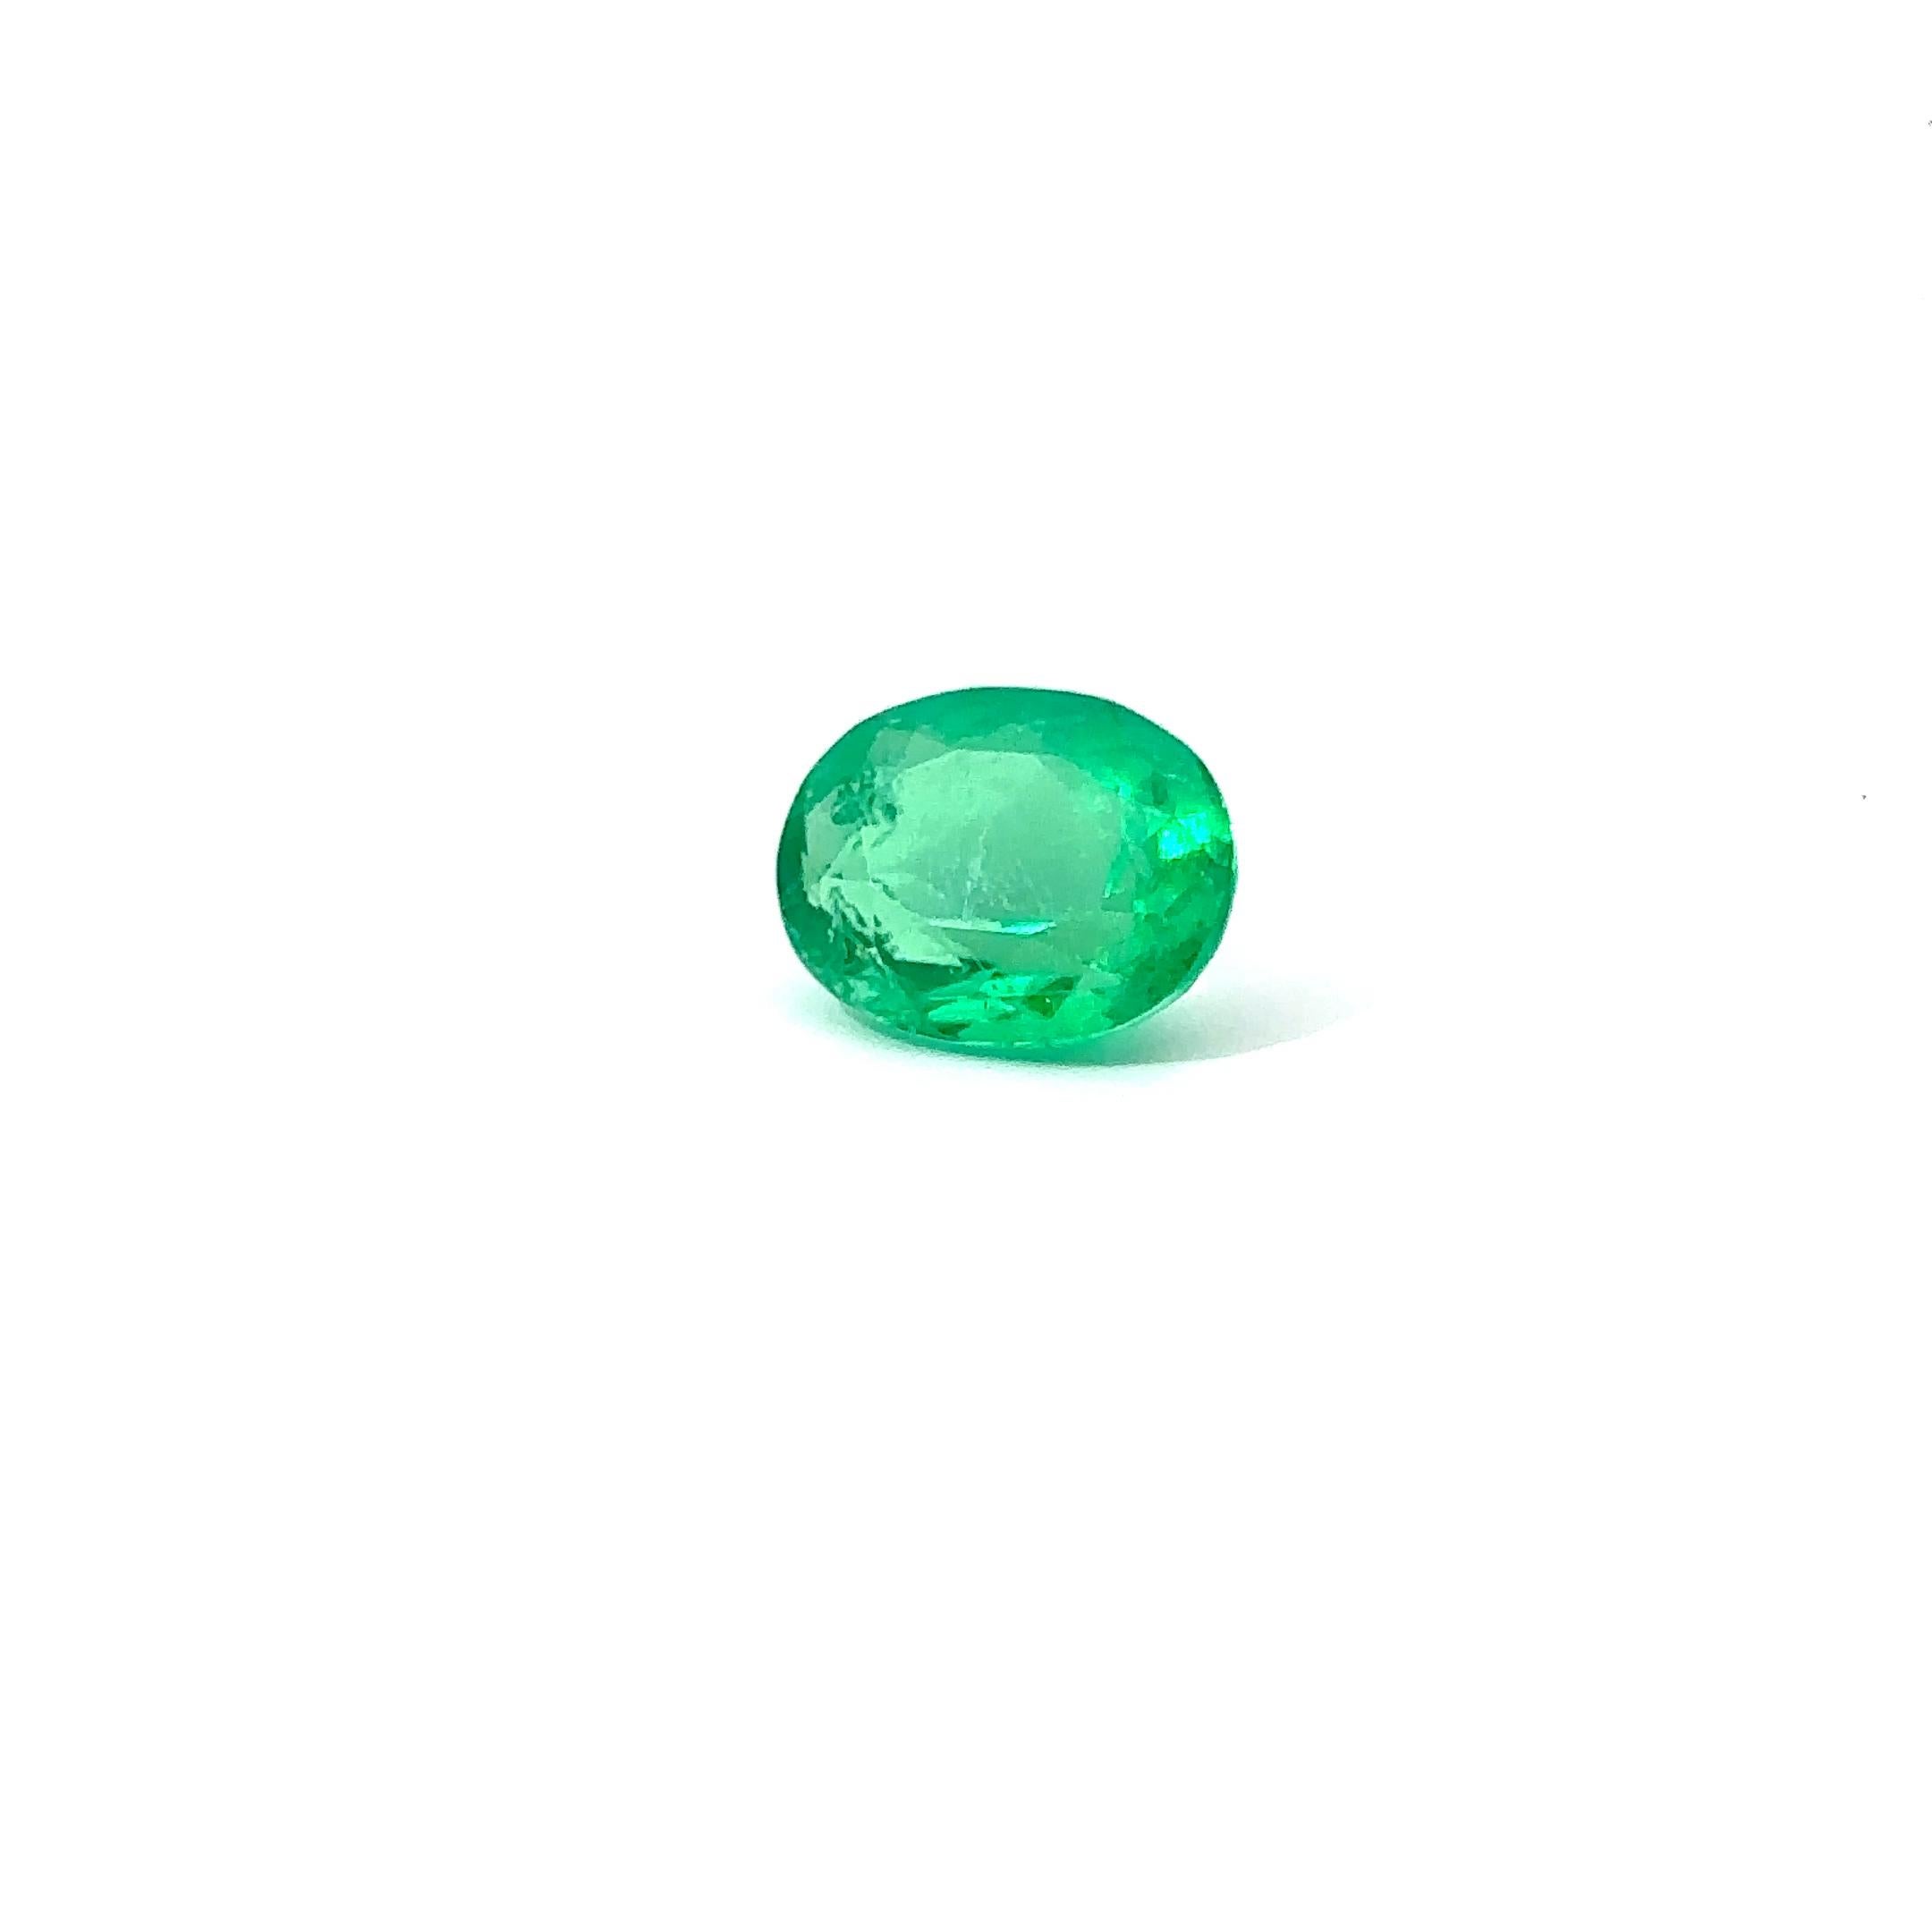 Oval Cut CDC Certified 5.0 Carat Colombia Emerald For Sale